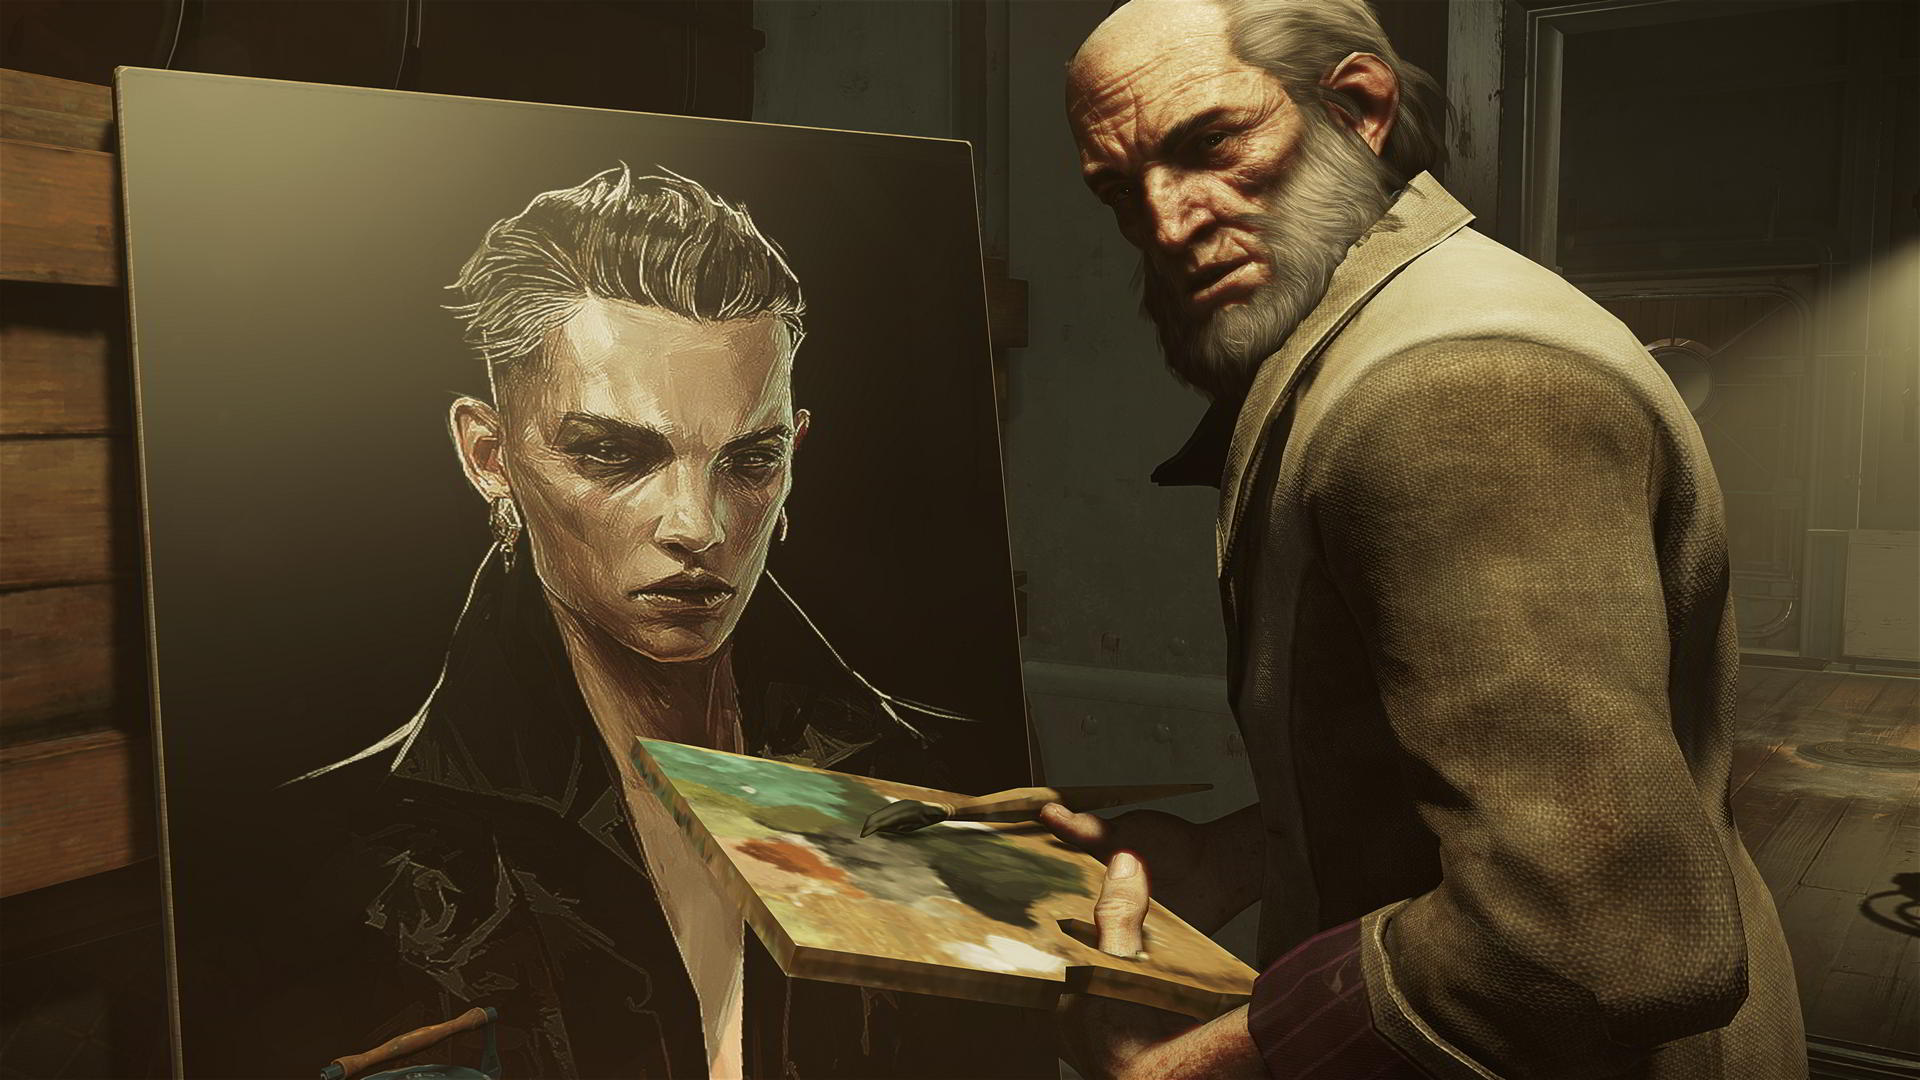 Image for Dishonored 2 PC beta patch fixes mouse sensitivity issues, CPU task priority, more